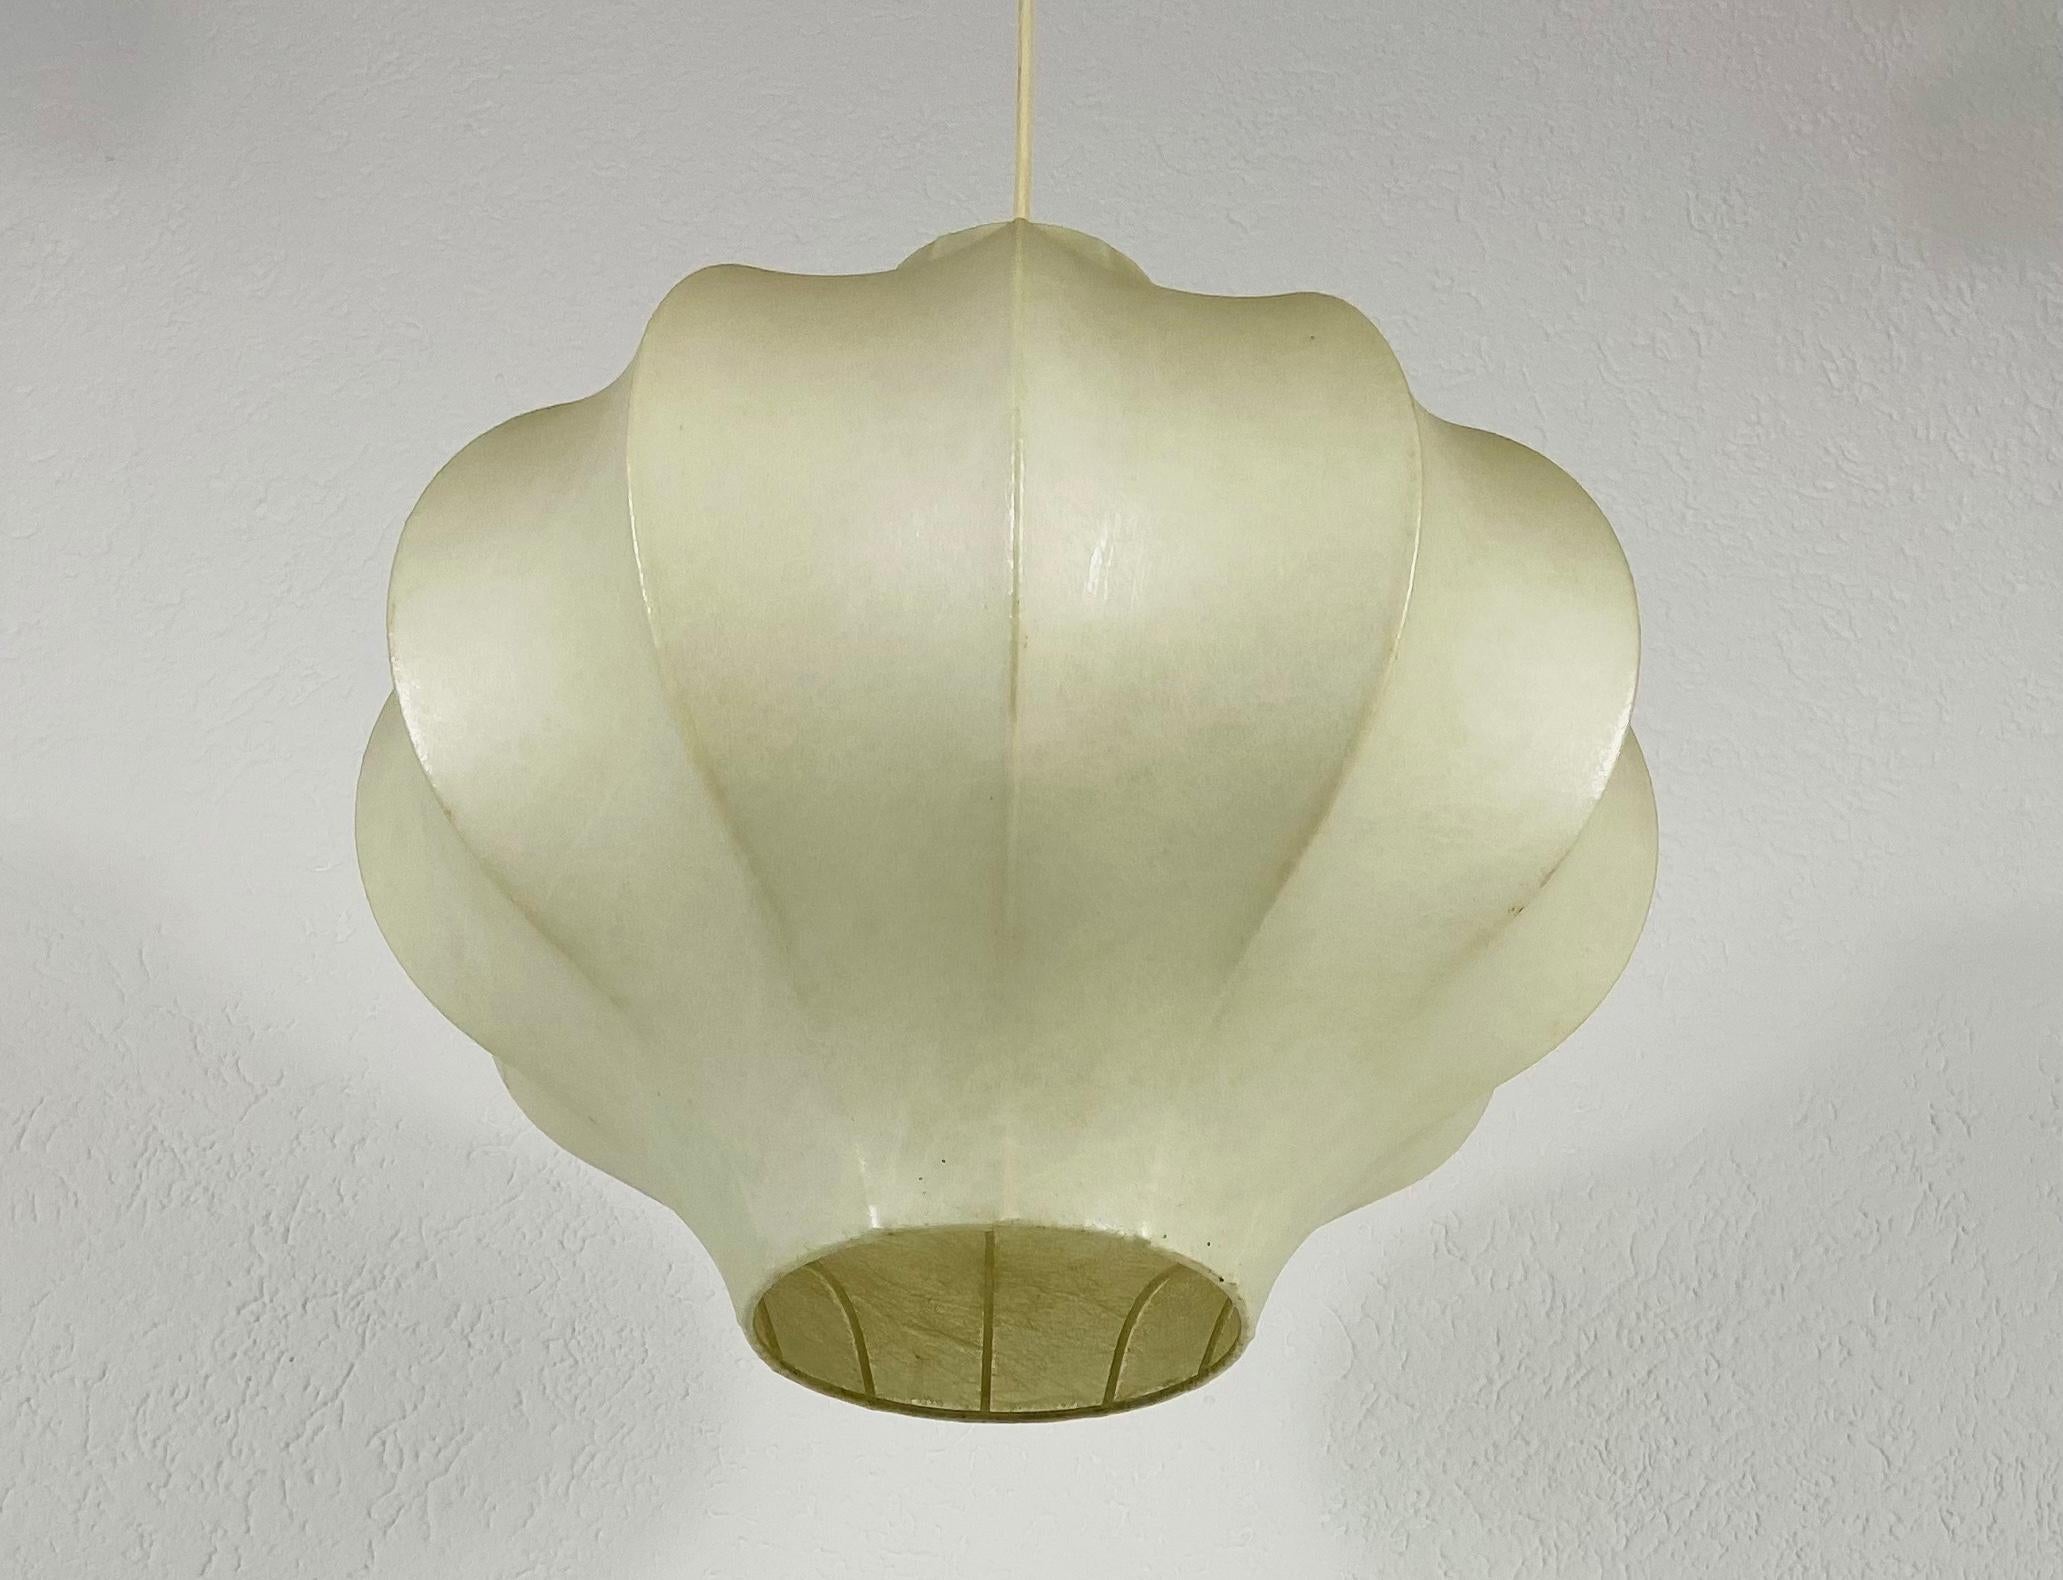 A cocoon pendant lamp made in Italy in the 1960s. The hanging lamp has been manufactured in the design of the lamps made by Achille Castiglioni. The lamp shade is of original cocoon and has a flower shape. 

Measures: Max height 72 cm
Height 39